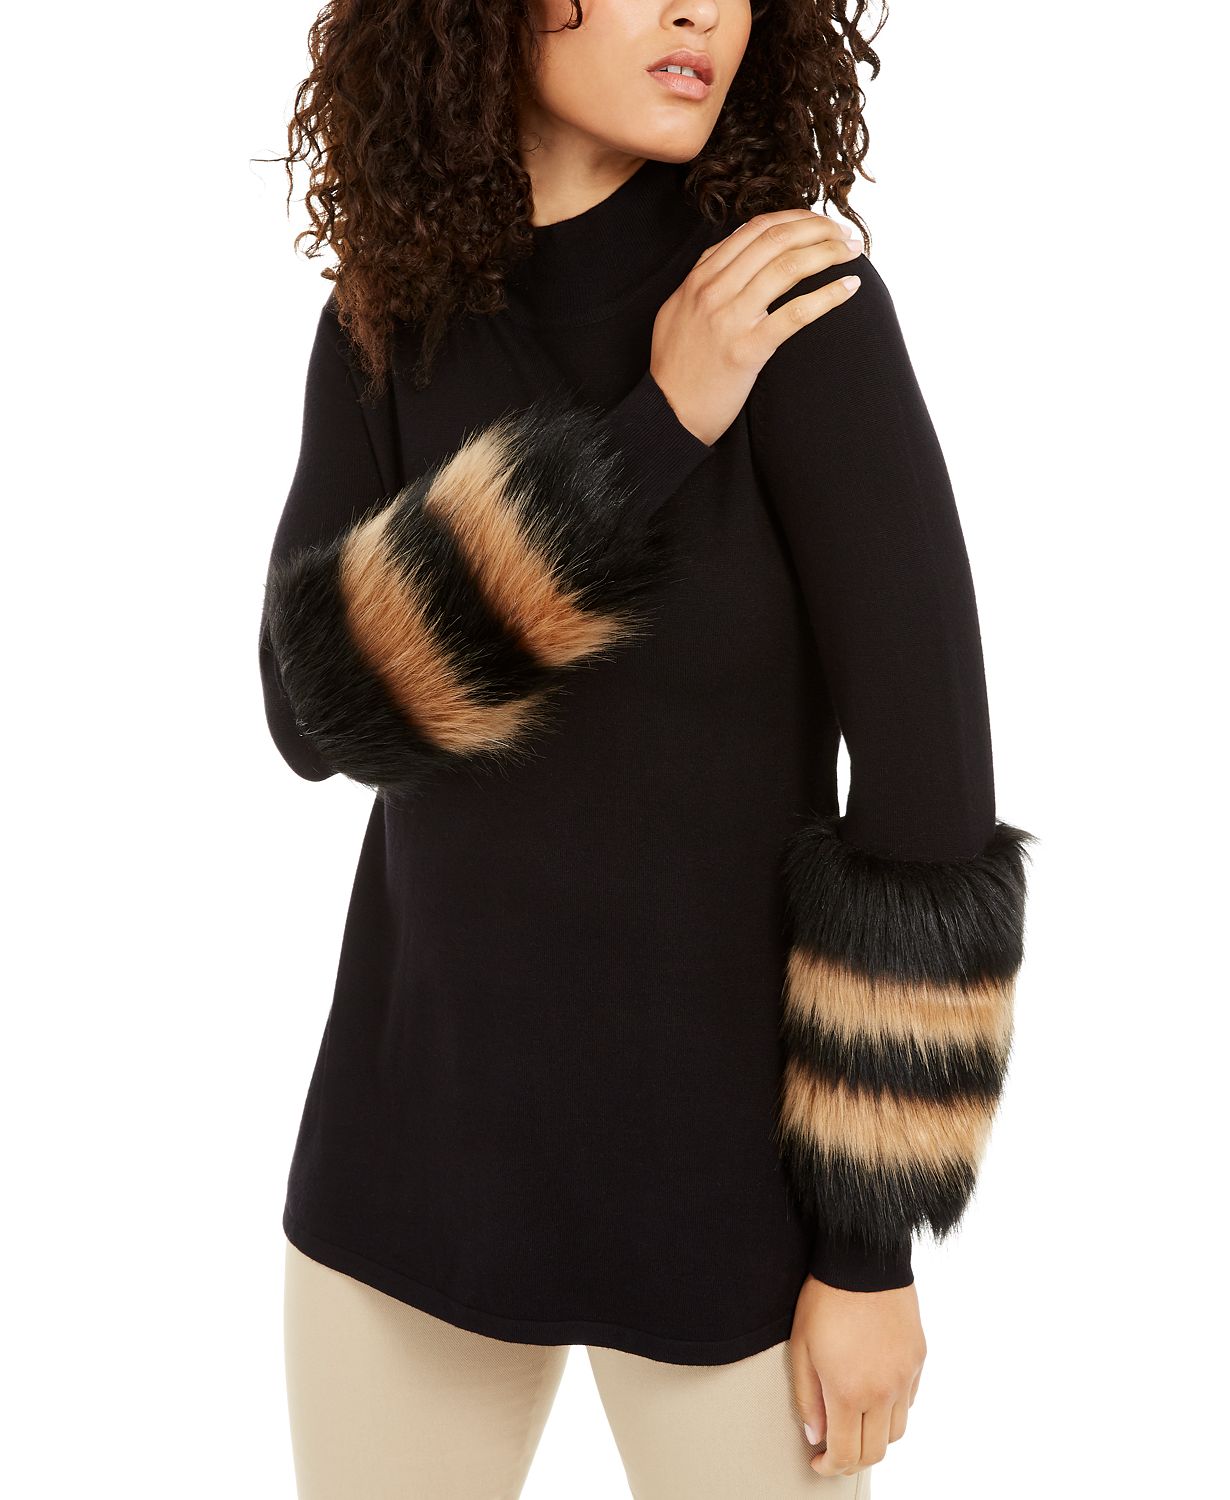 *HOT!* Macys – FLASH SALE with 50-75% Cold Weather Items for the Family! Baltimore Ravens fans ...